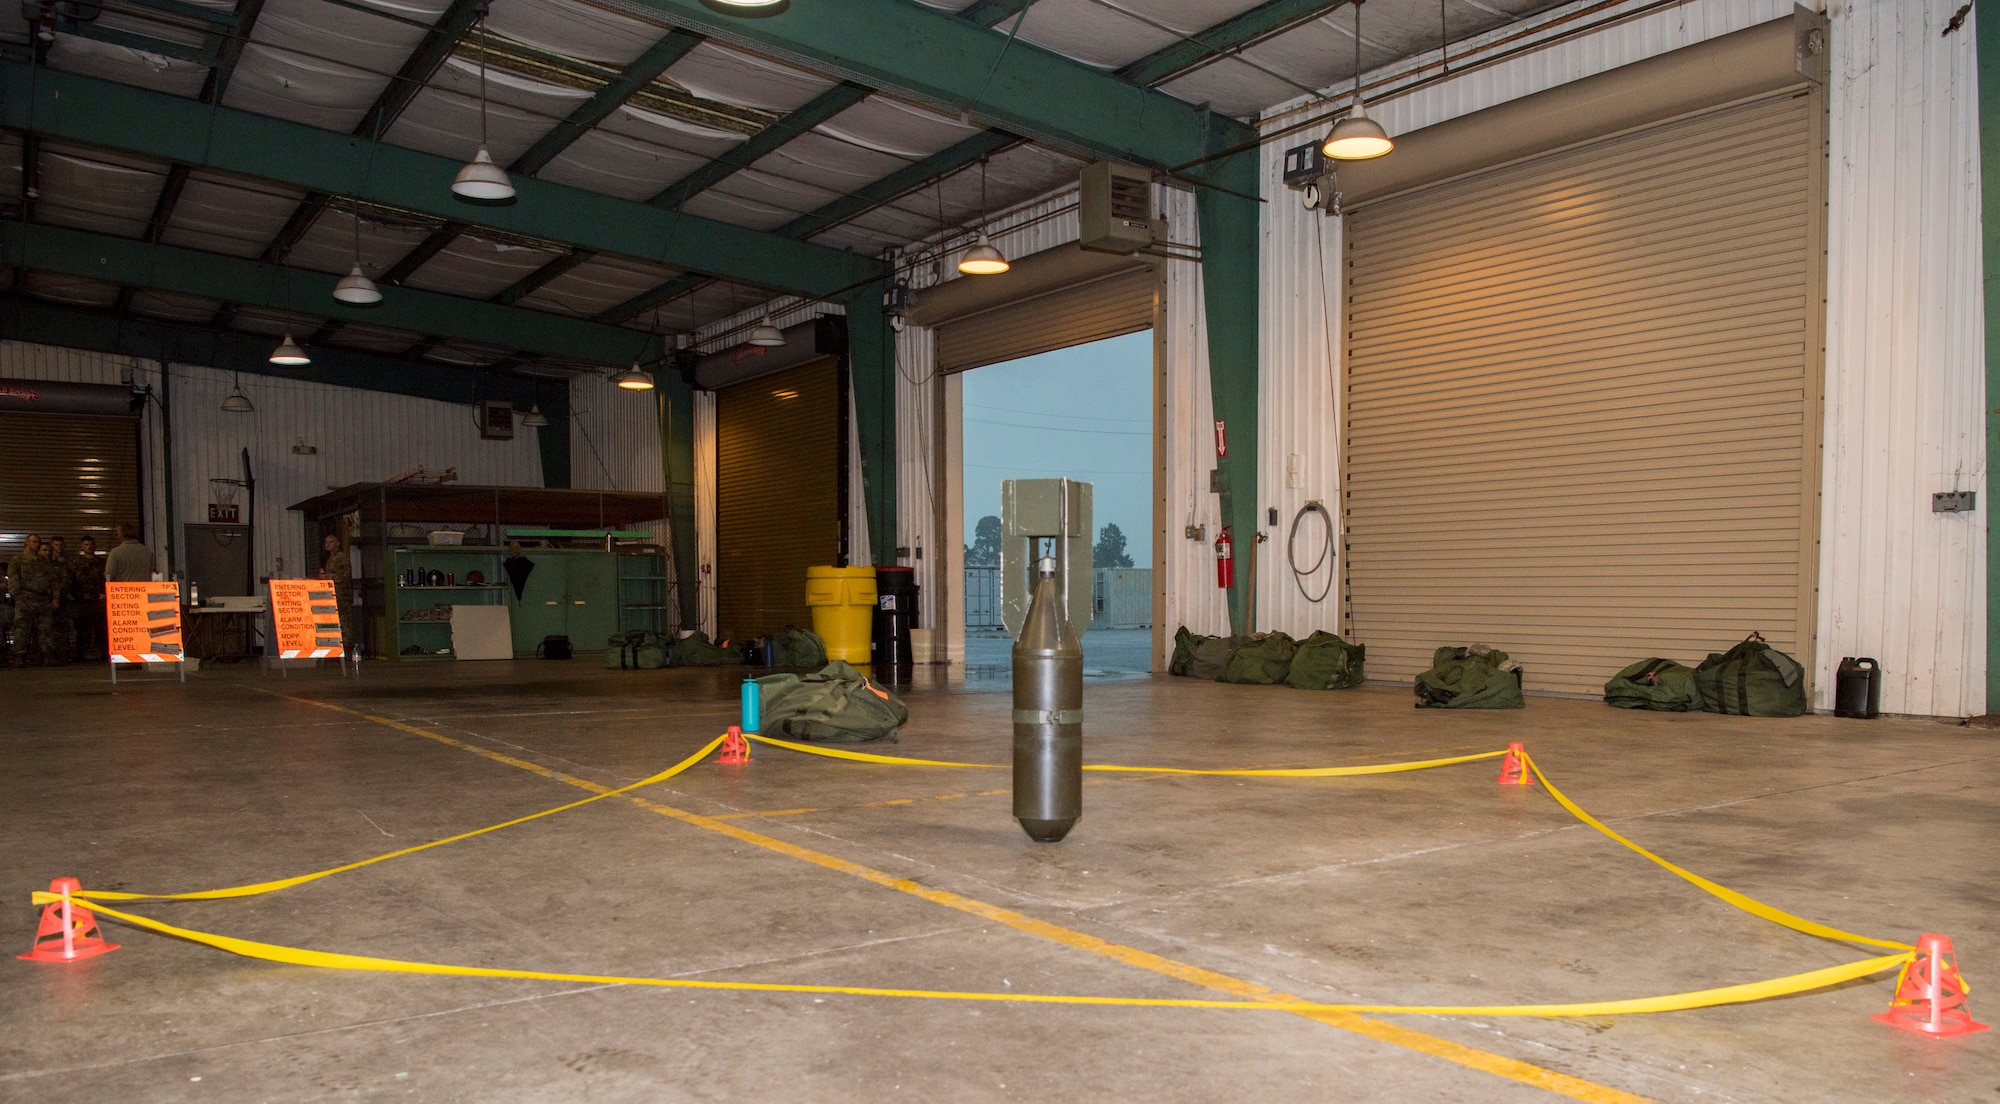 A simulated unexploded ordnance is cordoned off during deployment readiness training at MacDill Air Force Base, Fla., July 25, 2019.